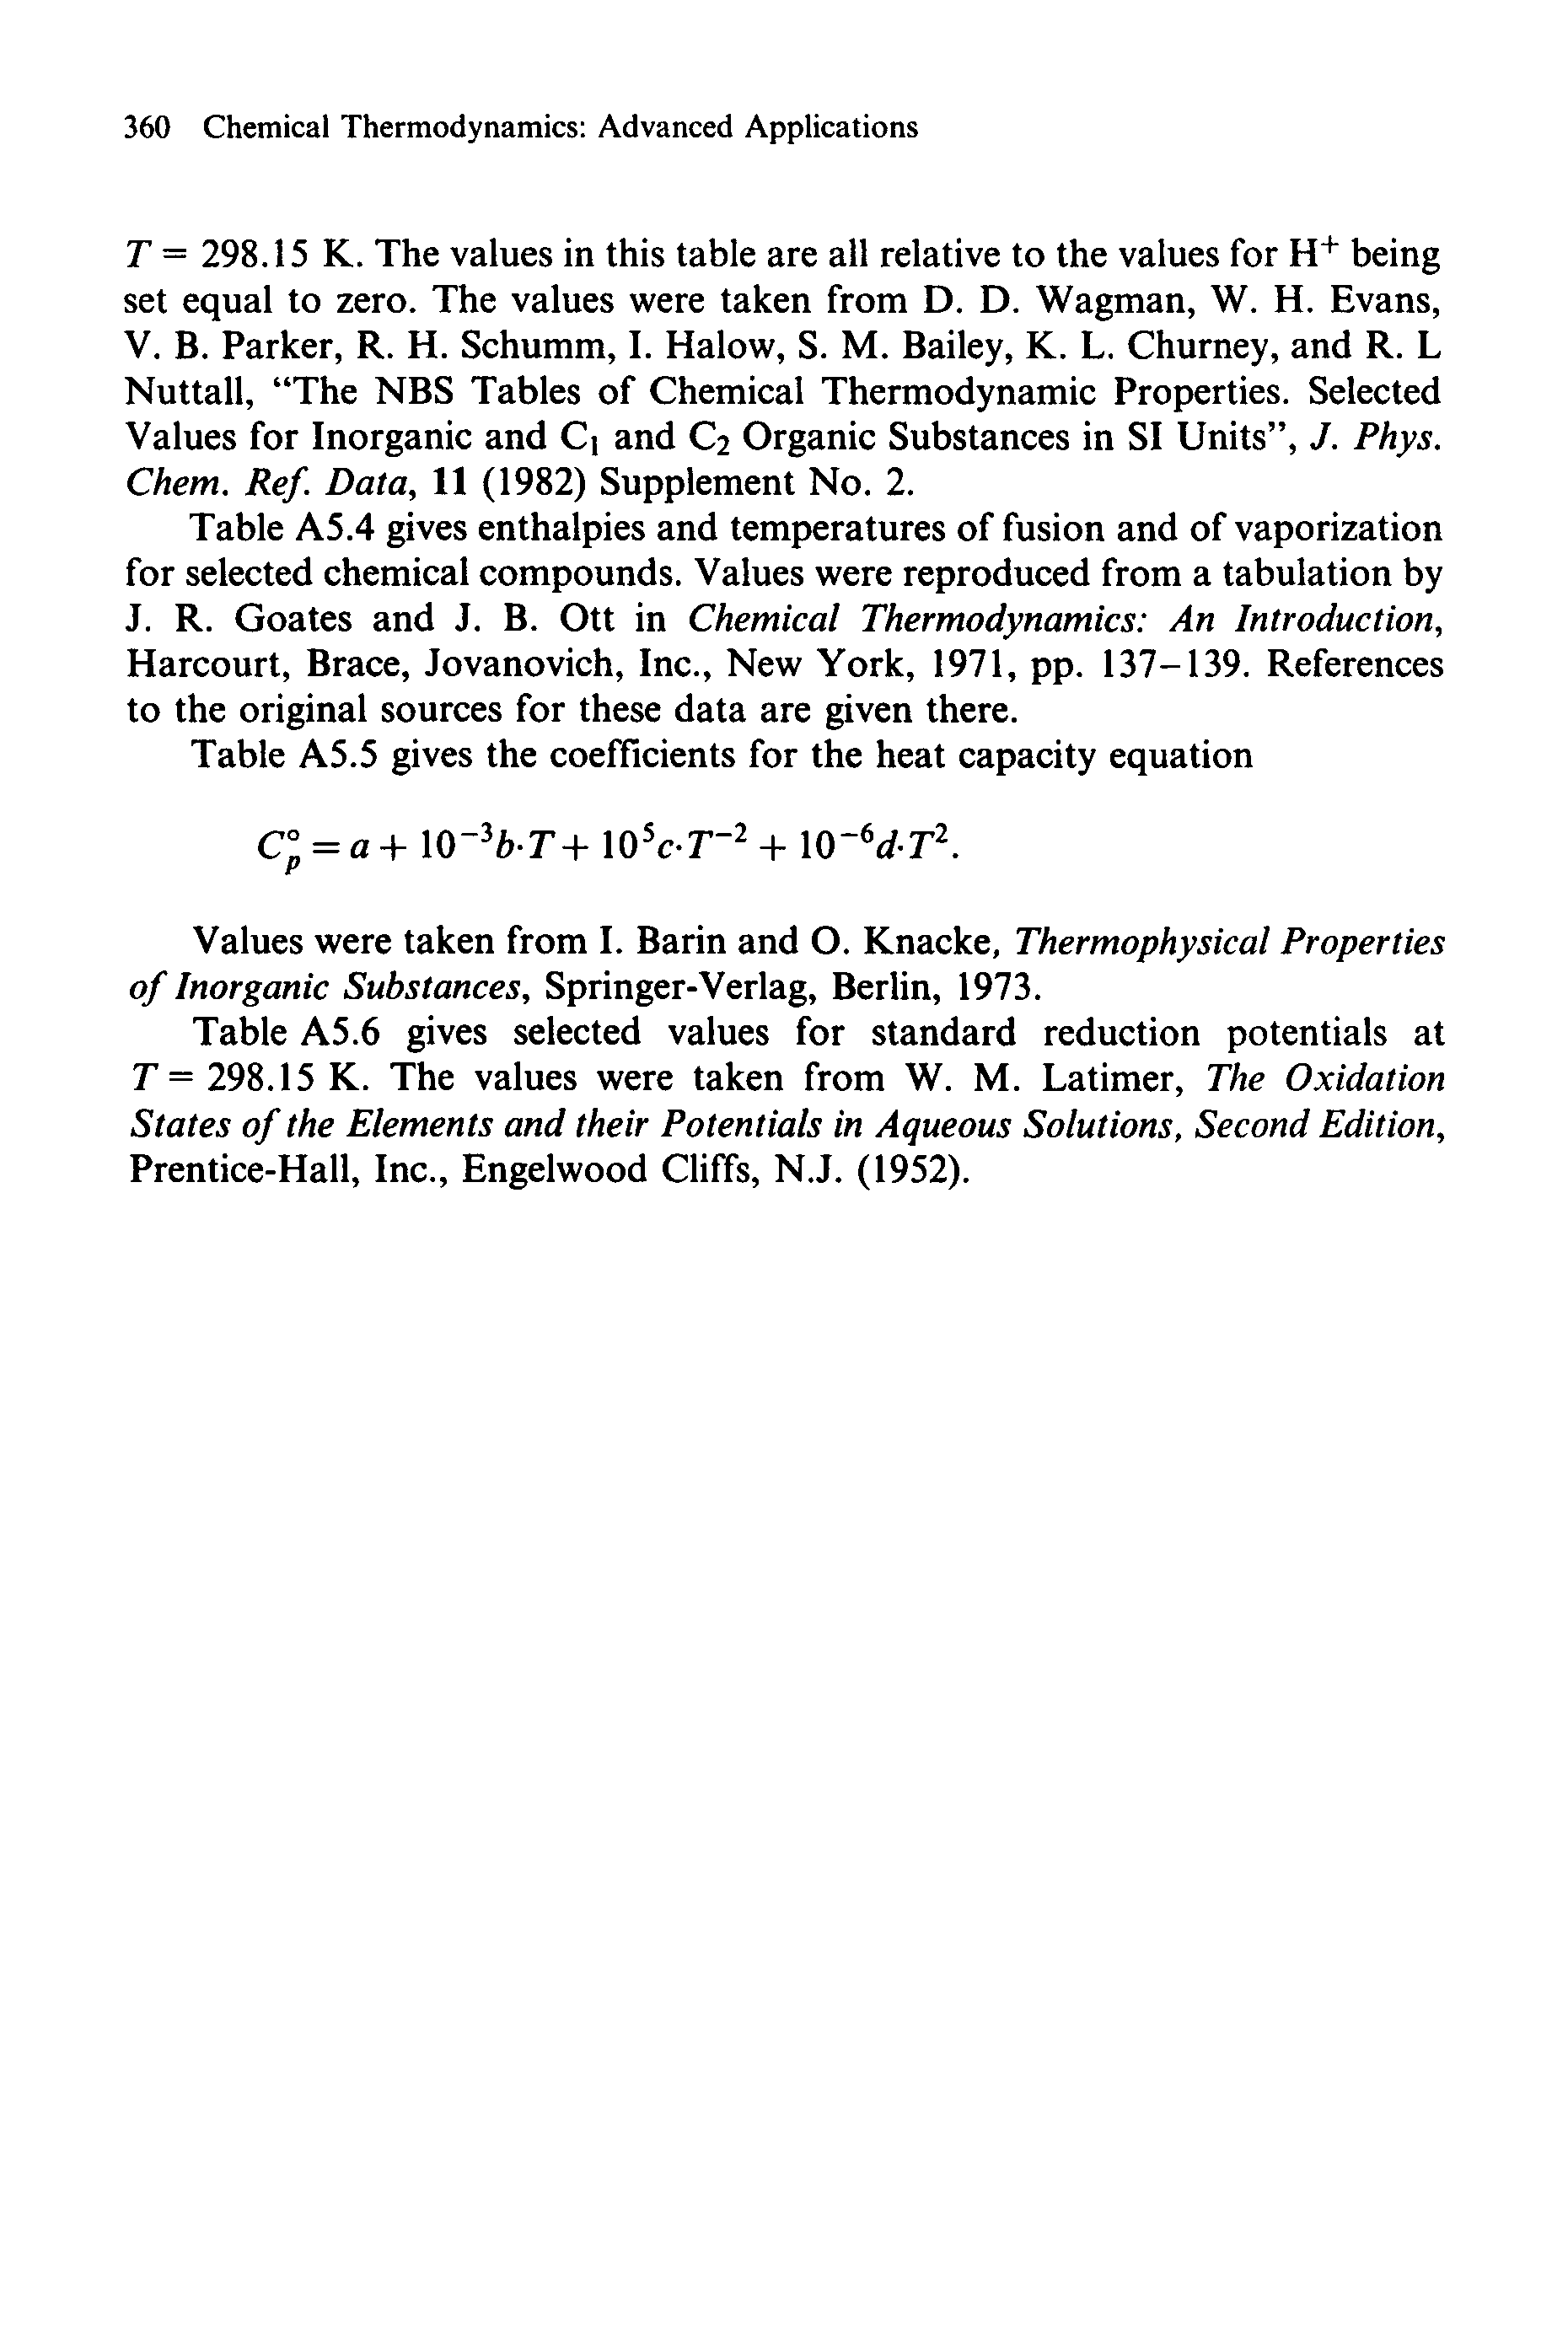 Table A5.6 gives selected values for standard reduction potentials at T = 298.15 K. The values were taken from W. M. Latimer, The Oxidation States of the Elements and their Potentials in Aqueous Solutions, Second Edition, Prentice-Hall, Inc., Engelwood Cliffs, N.J. (1952).